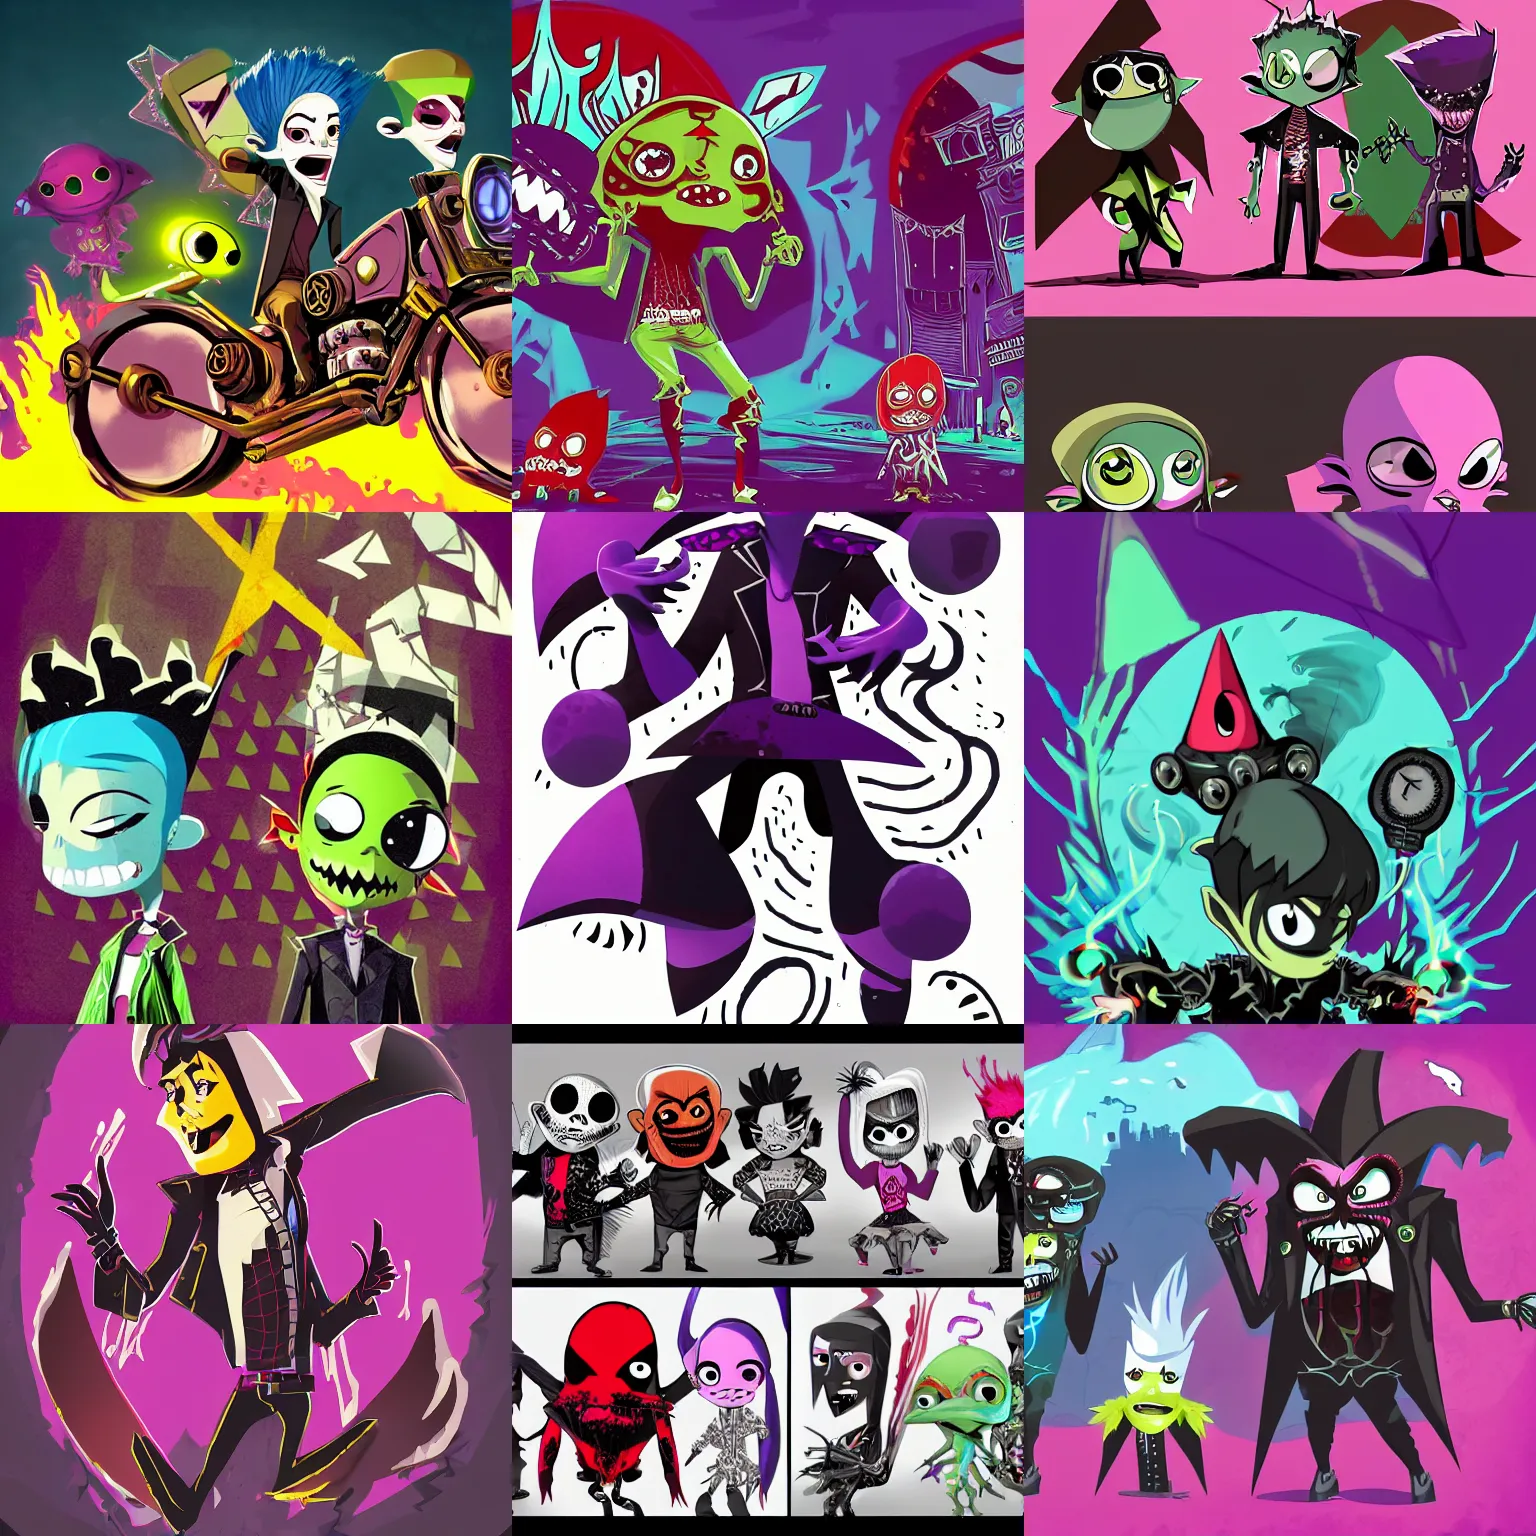 Prompt: psychic punk rocker vampiric electrifying rockstar vampire fish concept art for character designs of various shapes and sizes as well as backgrounds and vehicles by genndy tartakovsky and splatoon by nintendo and the psychonauts franchise by doublefine tim shafer artists for the new hotel transylvania film